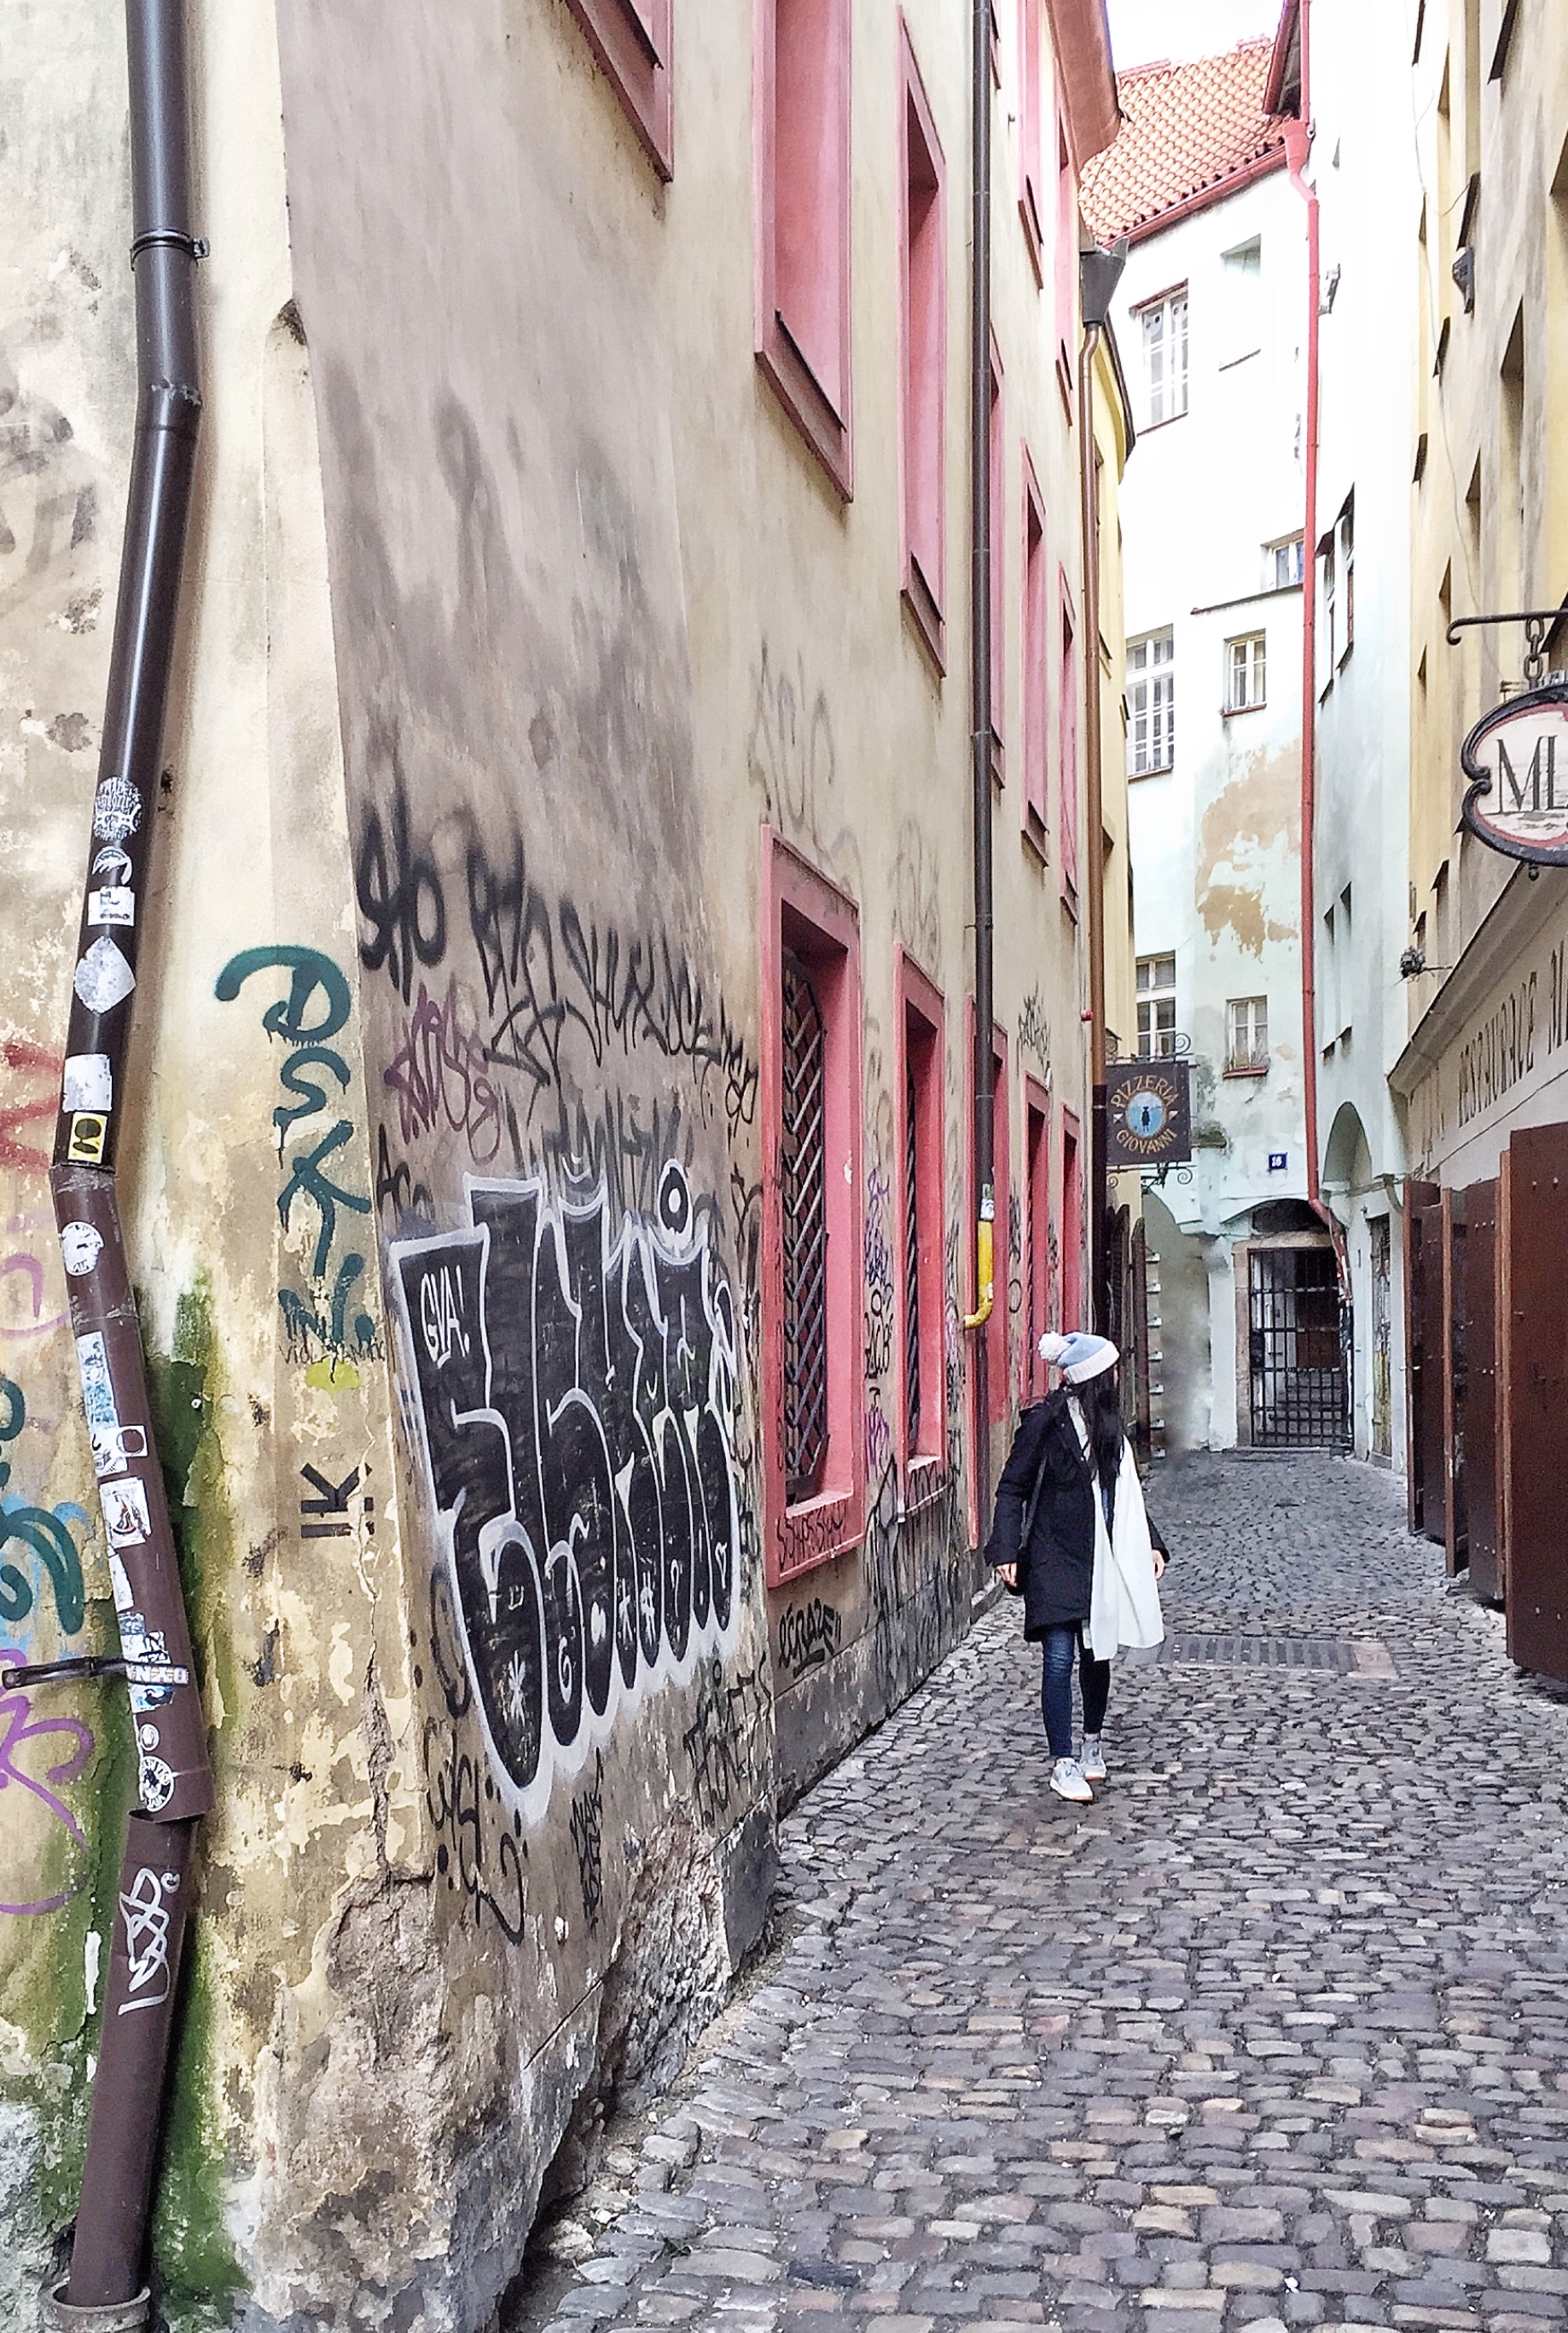 Wandering the streets of Prague